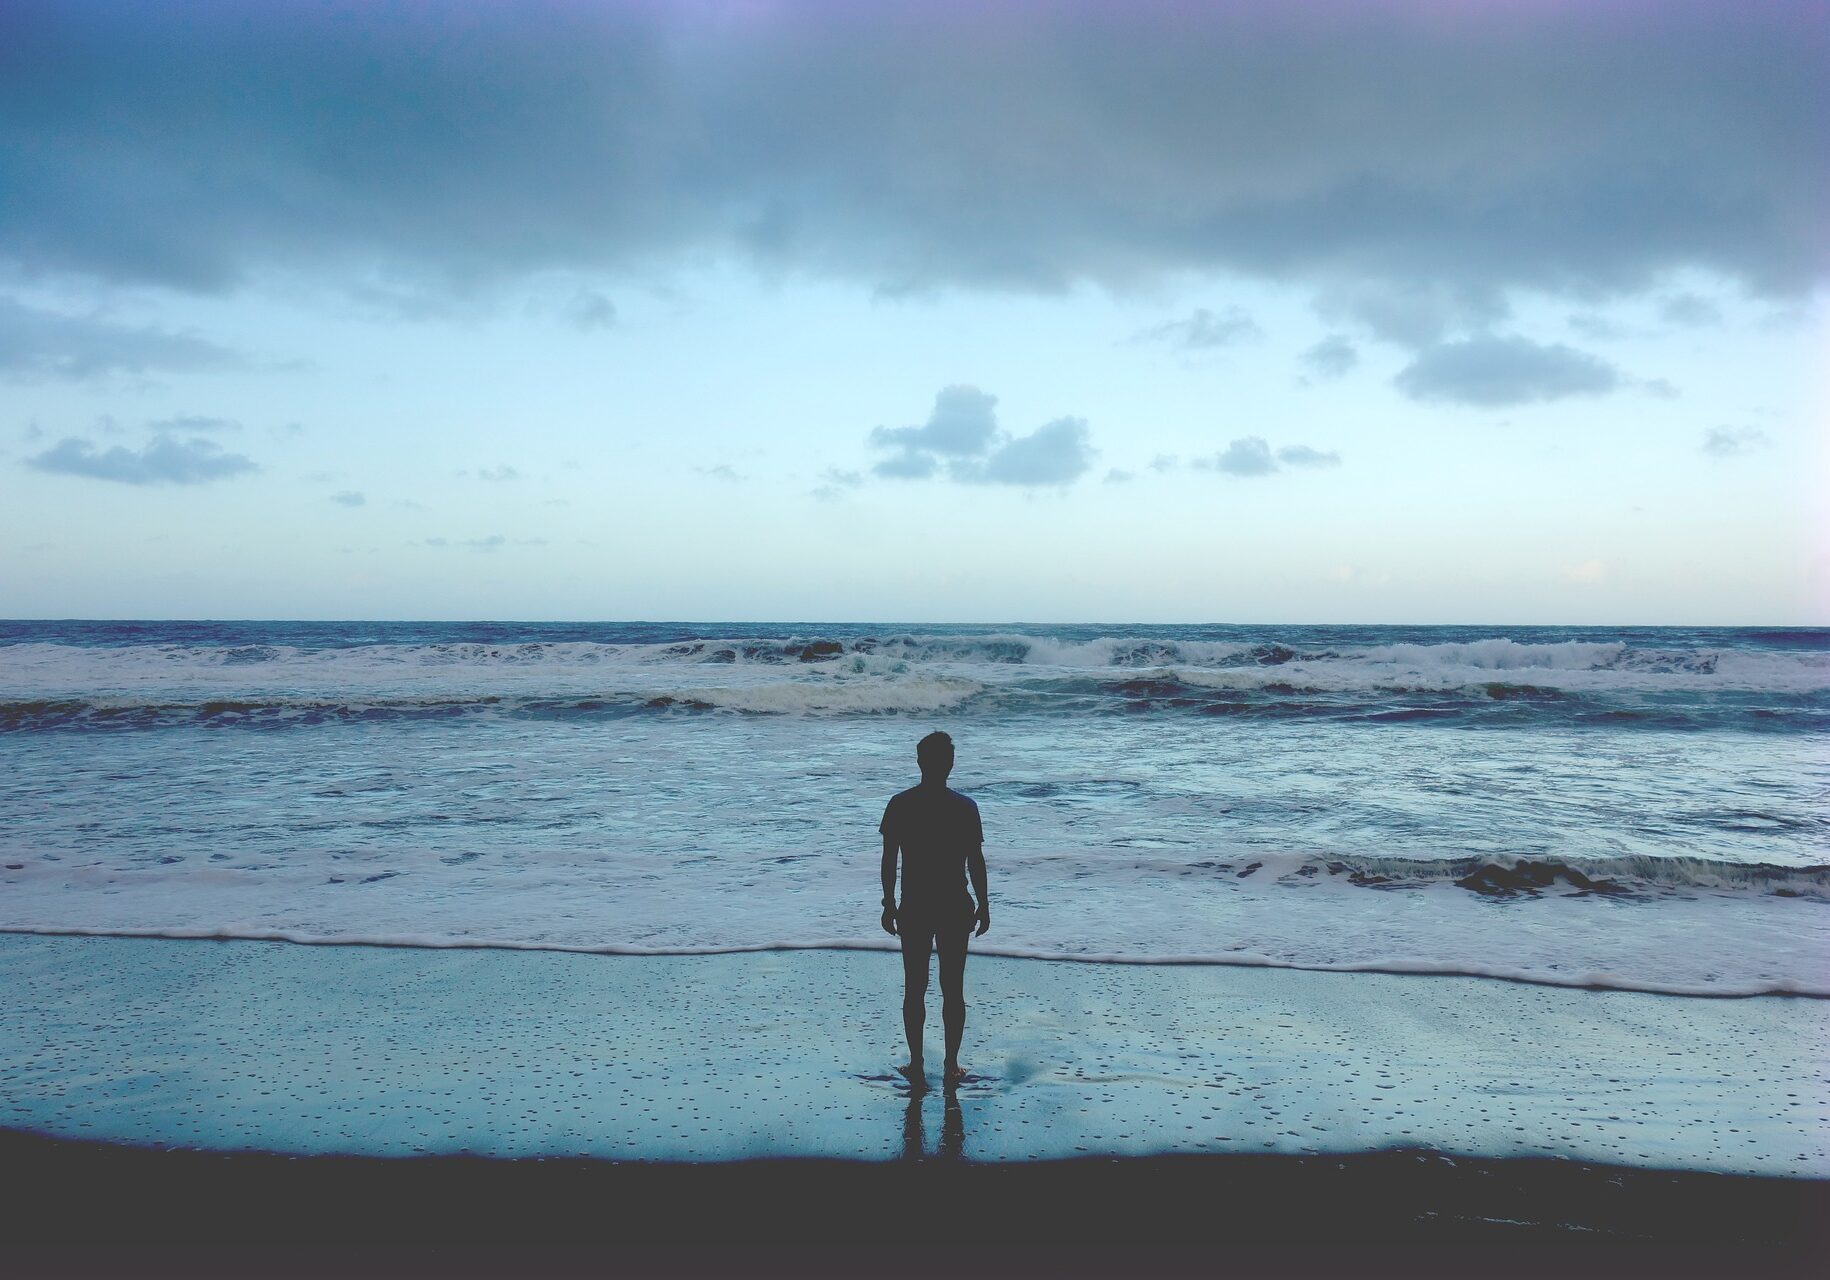 A person standing on the beach looking out at the ocean.